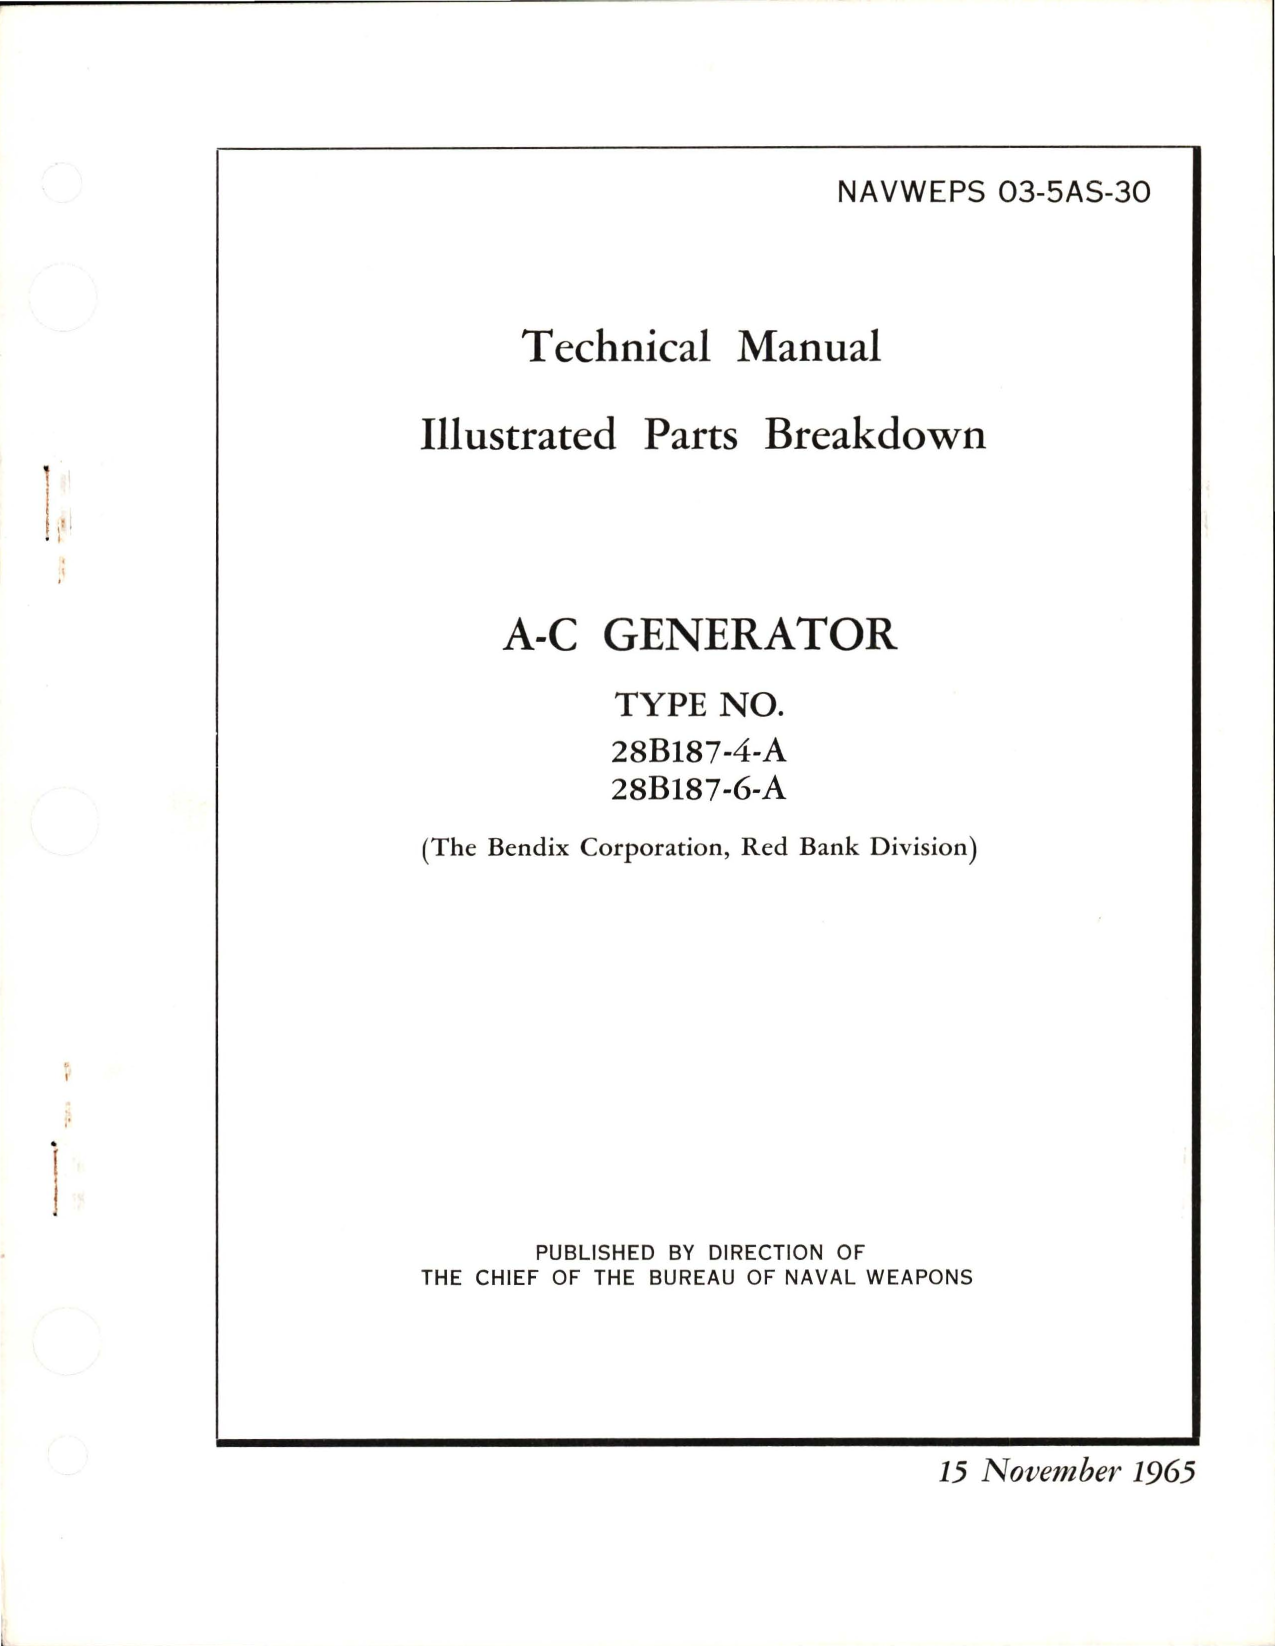 Sample page 1 from AirCorps Library document: Illustrated Parts Breakdown for AC Generator - Types 28B187-4-A, 28B187-6-A 